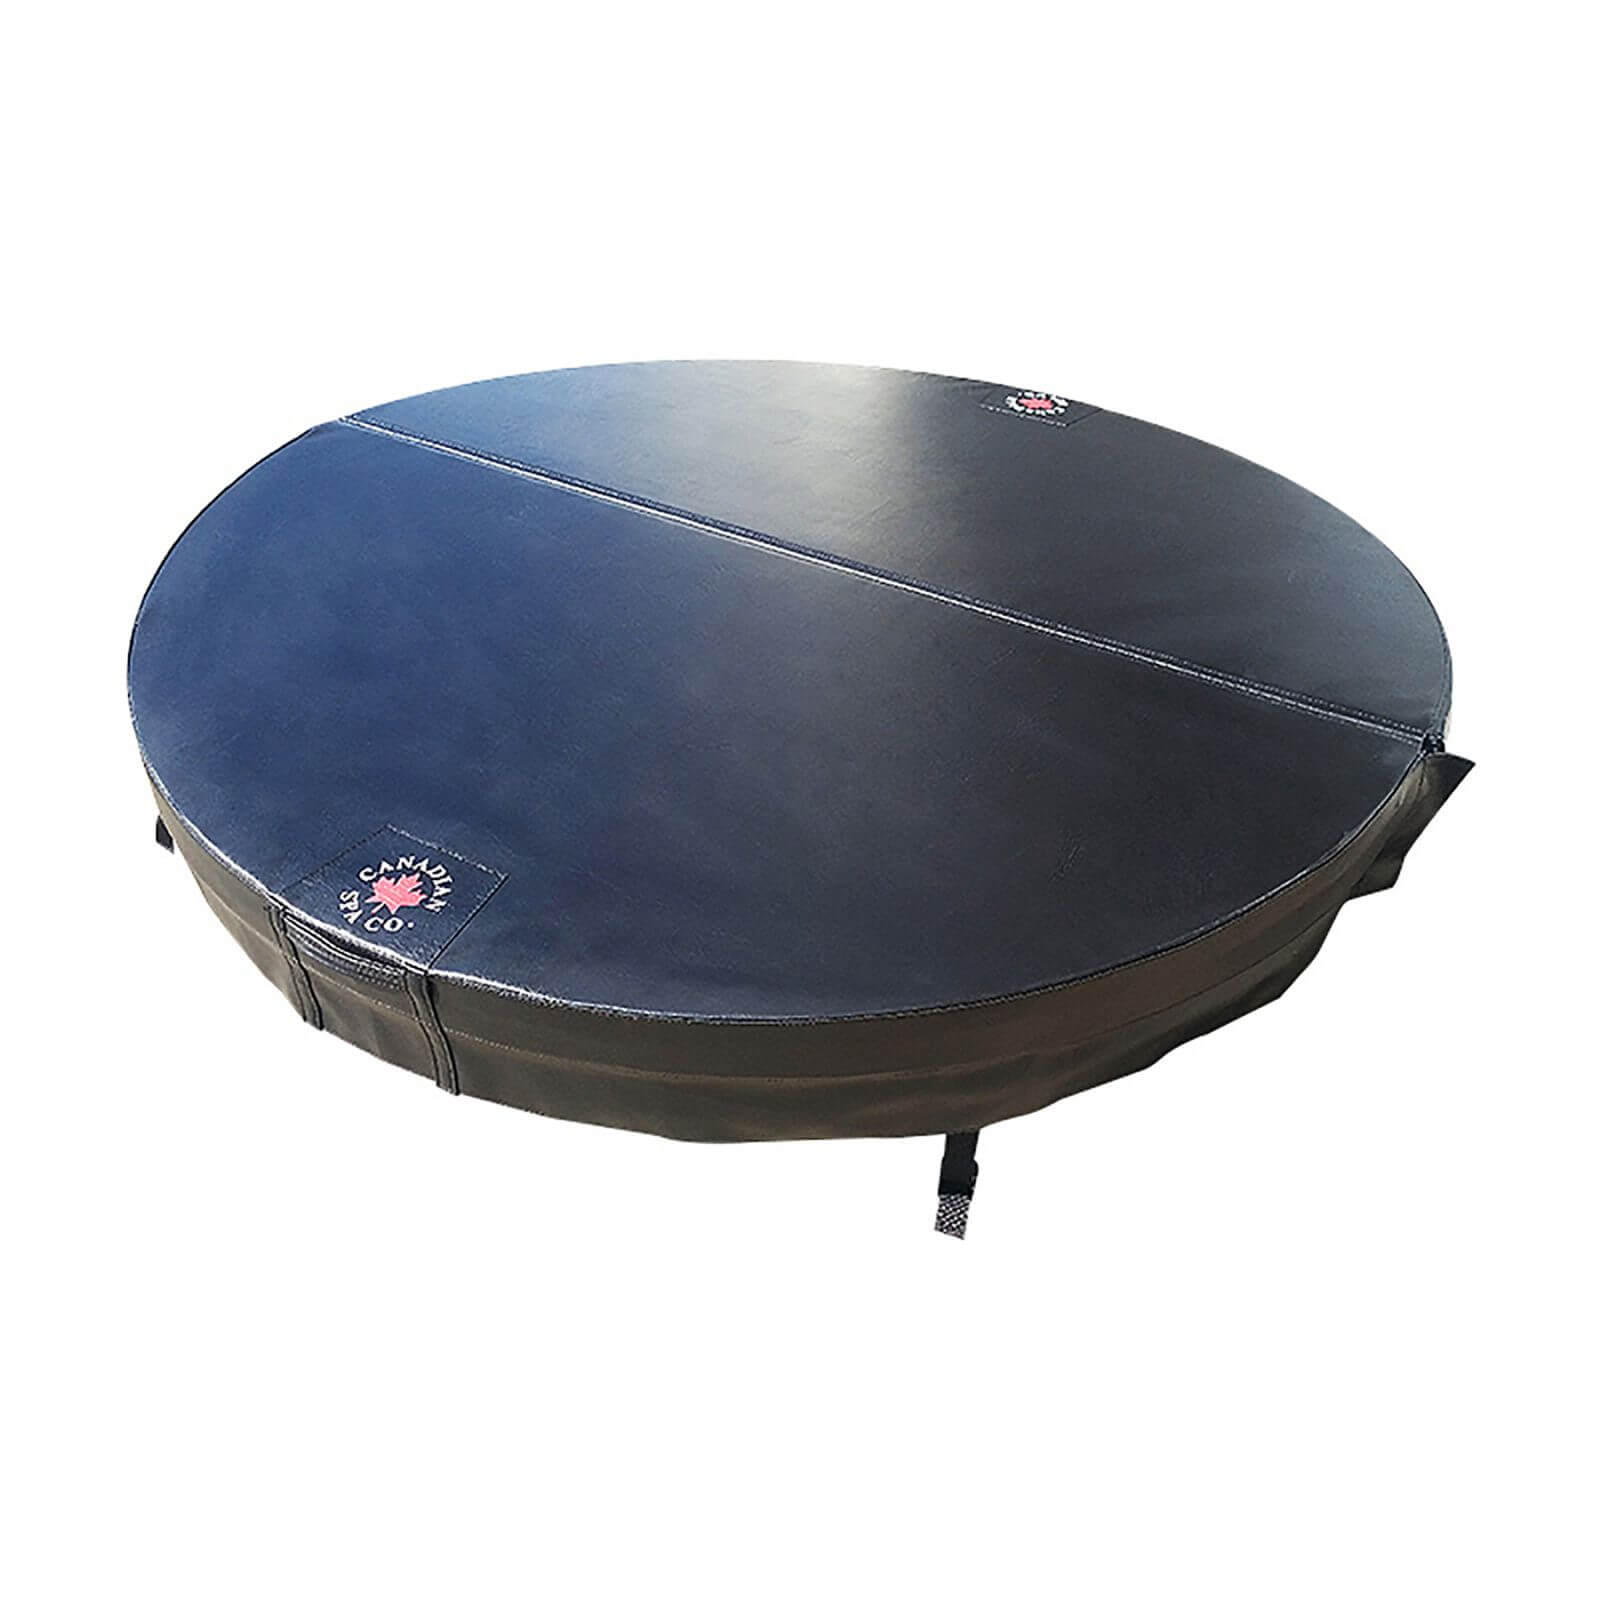 Canadian Spa Swift Current / Swift Current 2 Upgrade Hot Tub Cover